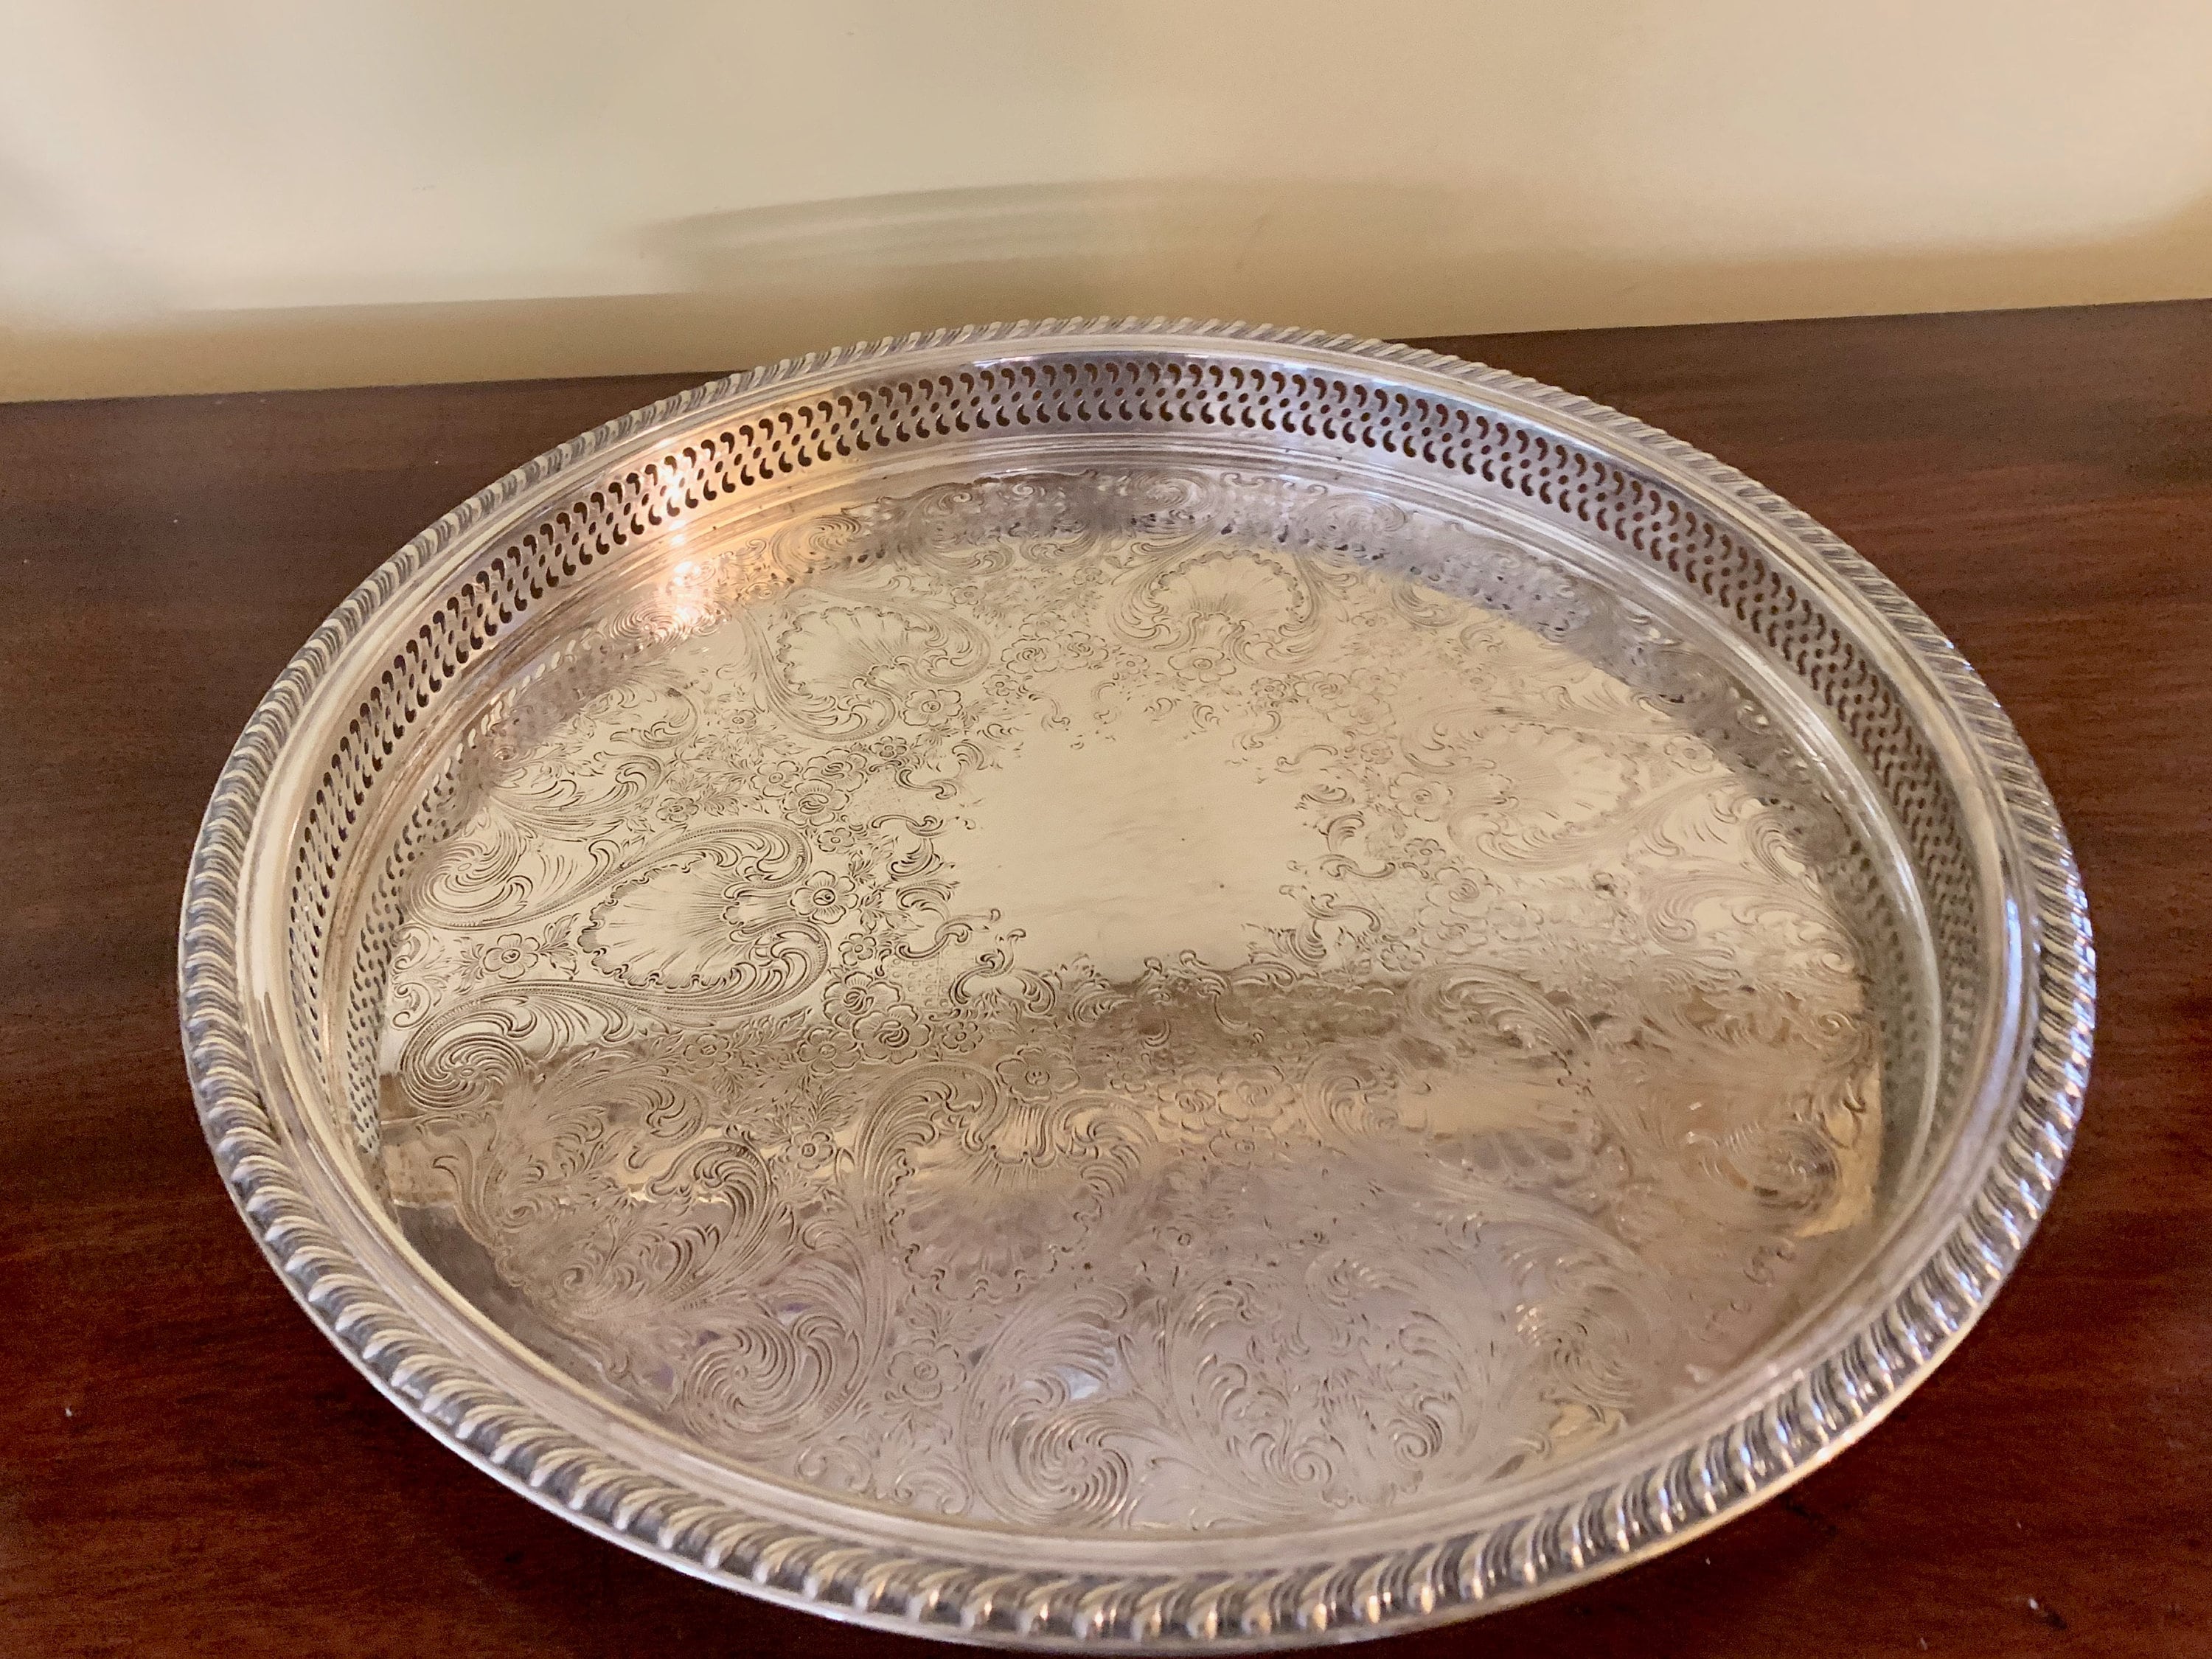 Silver Gallery Tray, 15 Inch Round Silver Plate Engraved Tray, Pierced